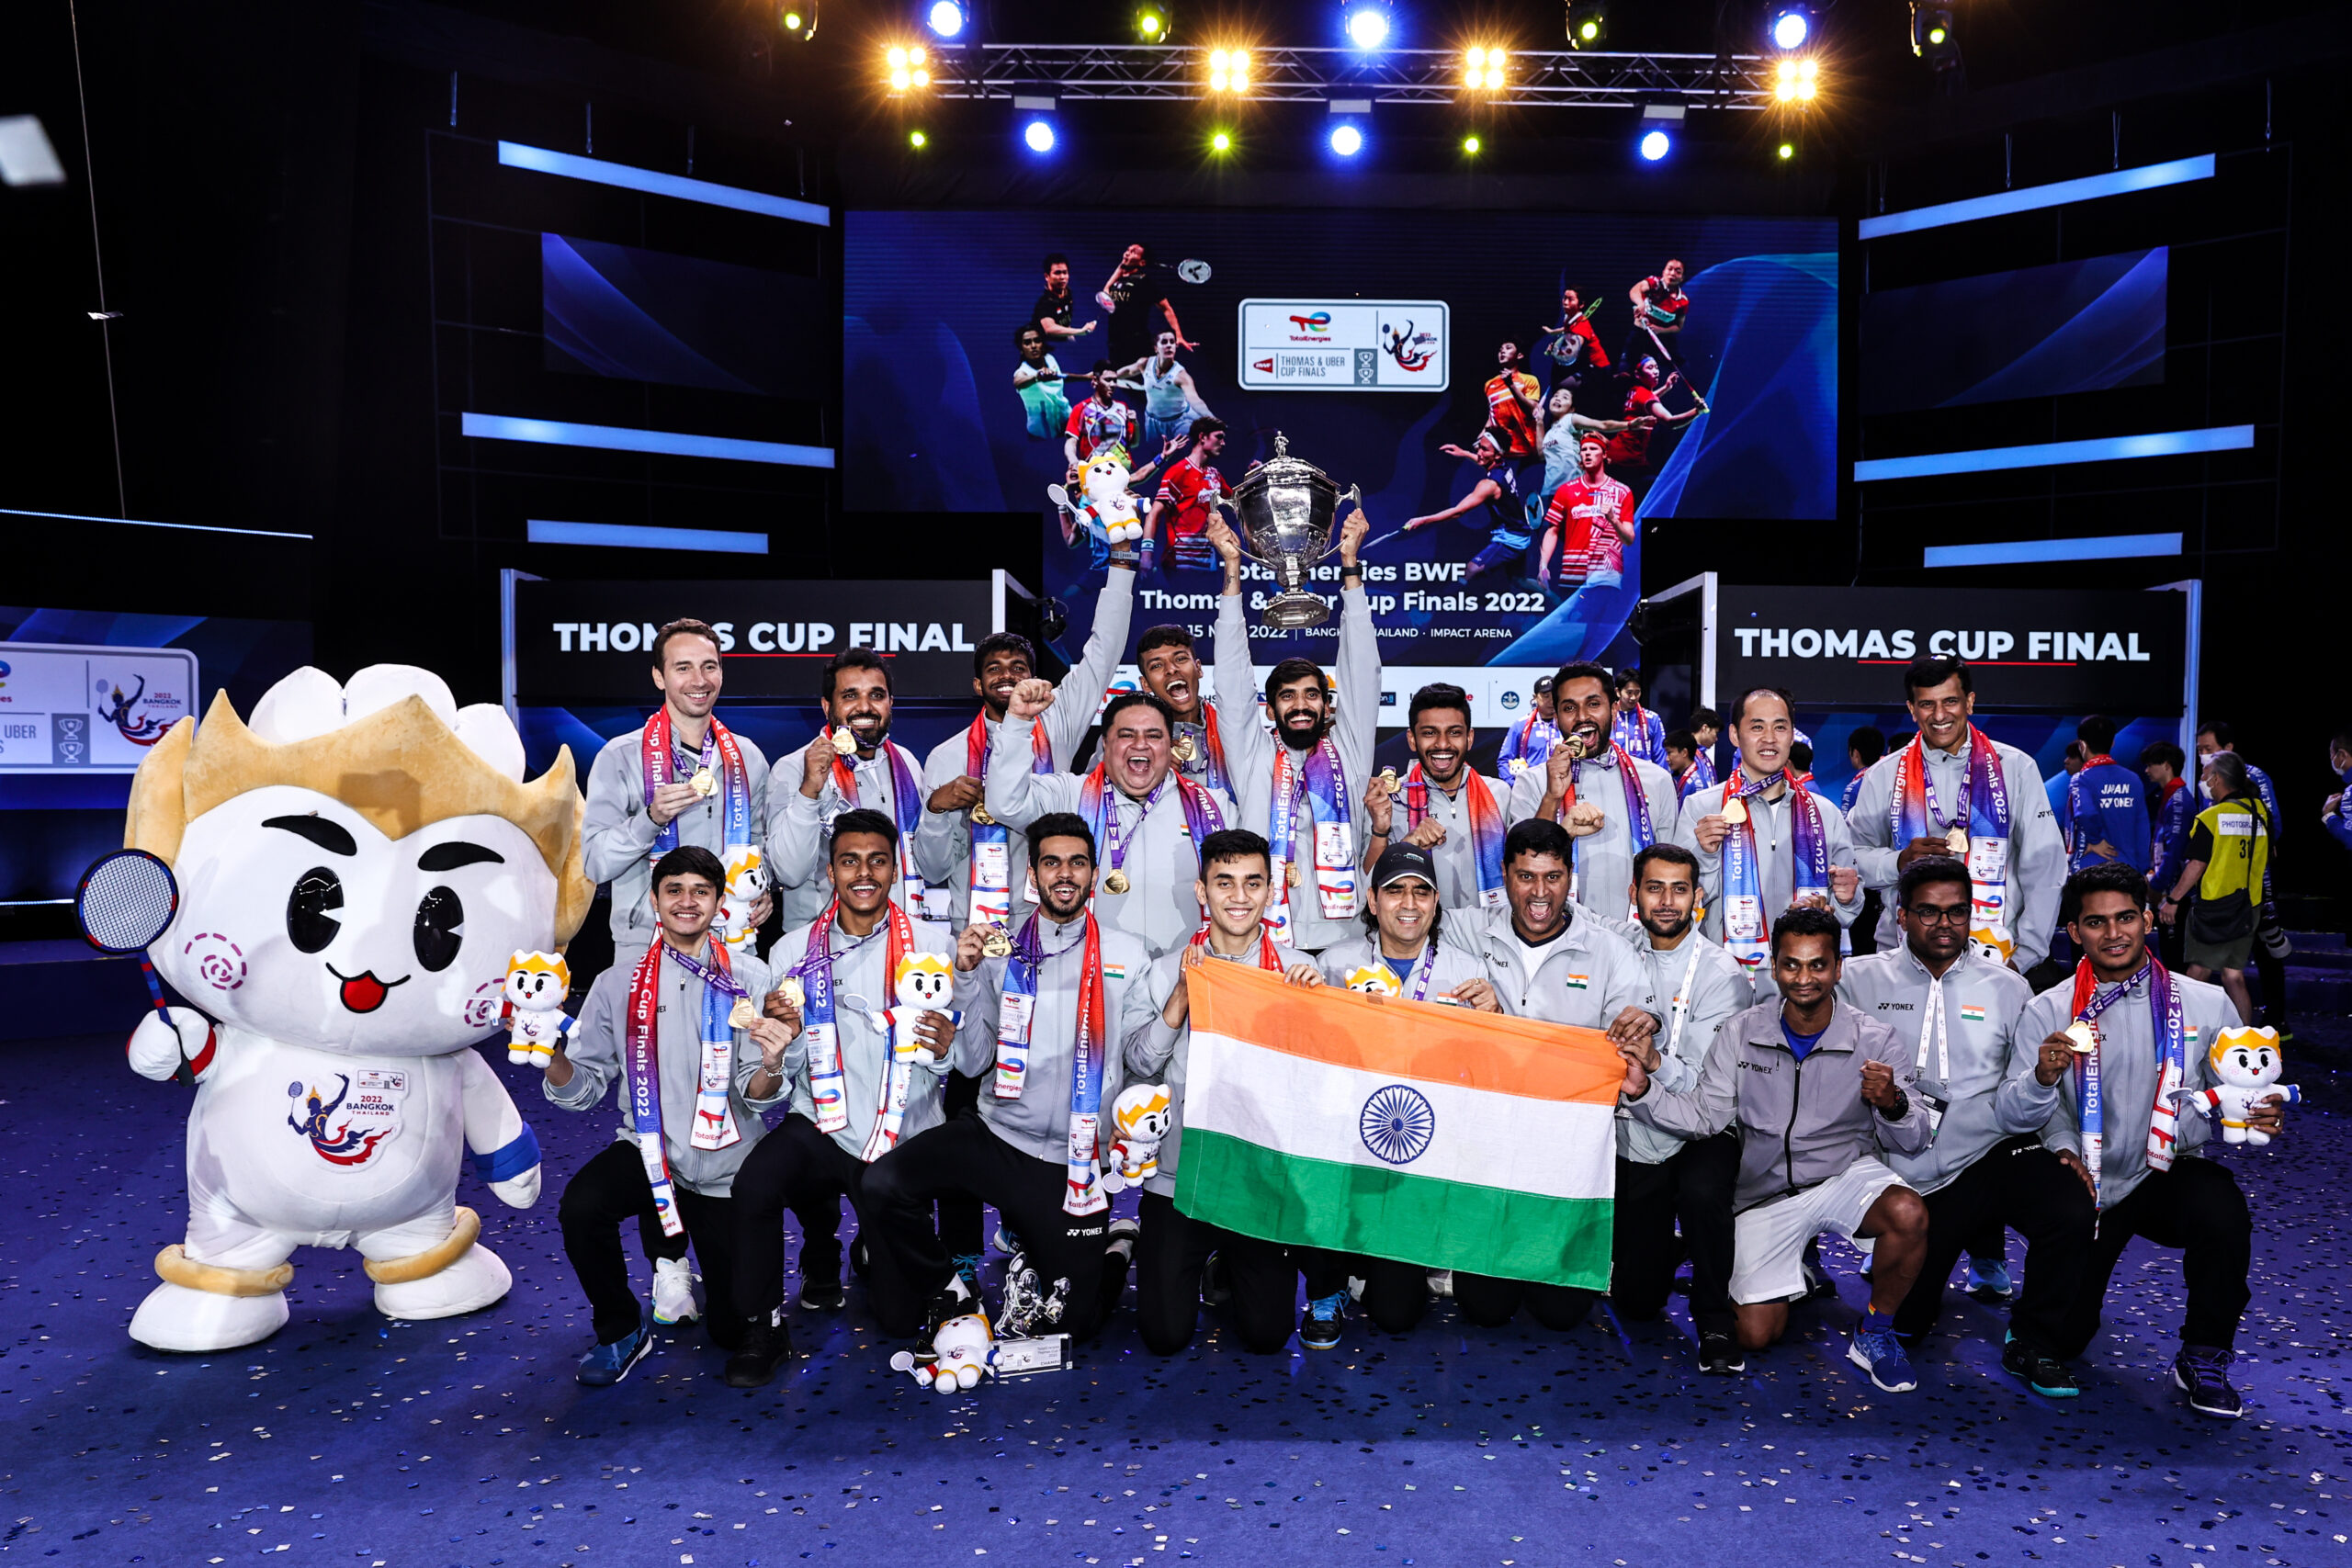 Thomas Cup triumph, a historic feat for Indian badminton